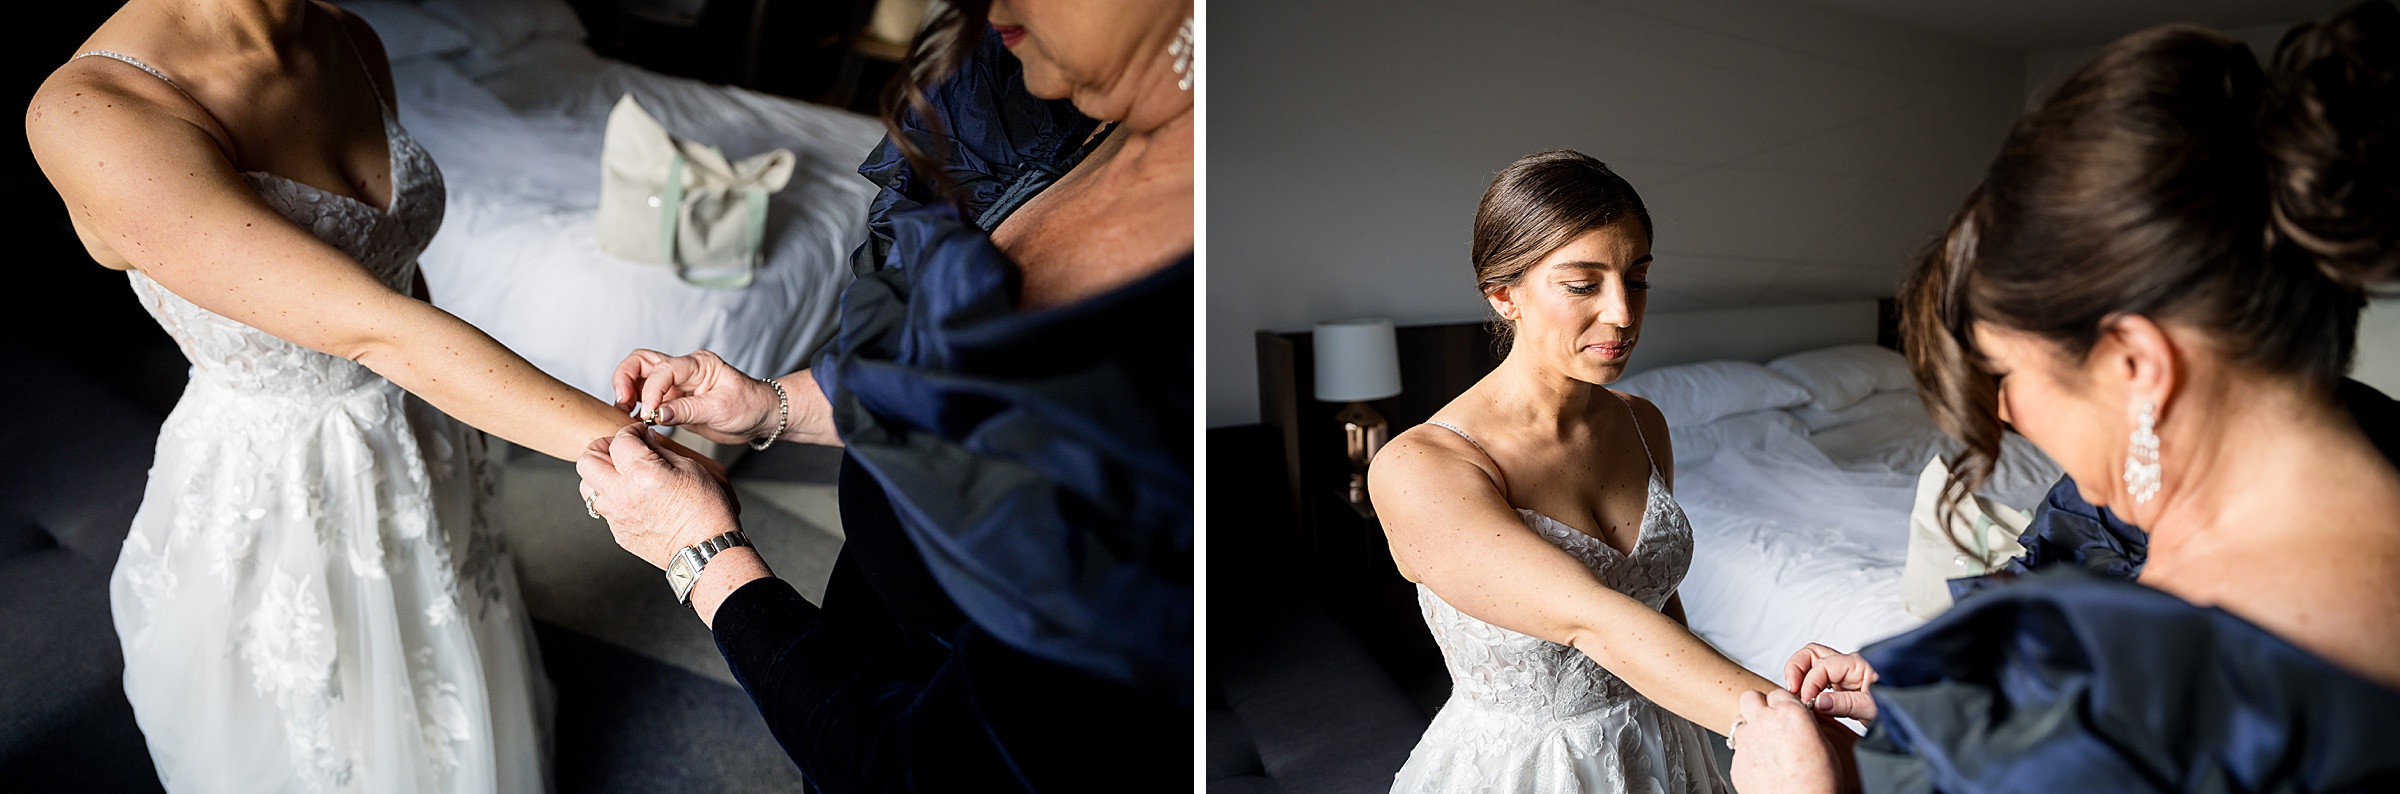 A bride is getting ready for her Lilah Events wedding in a hotel room.